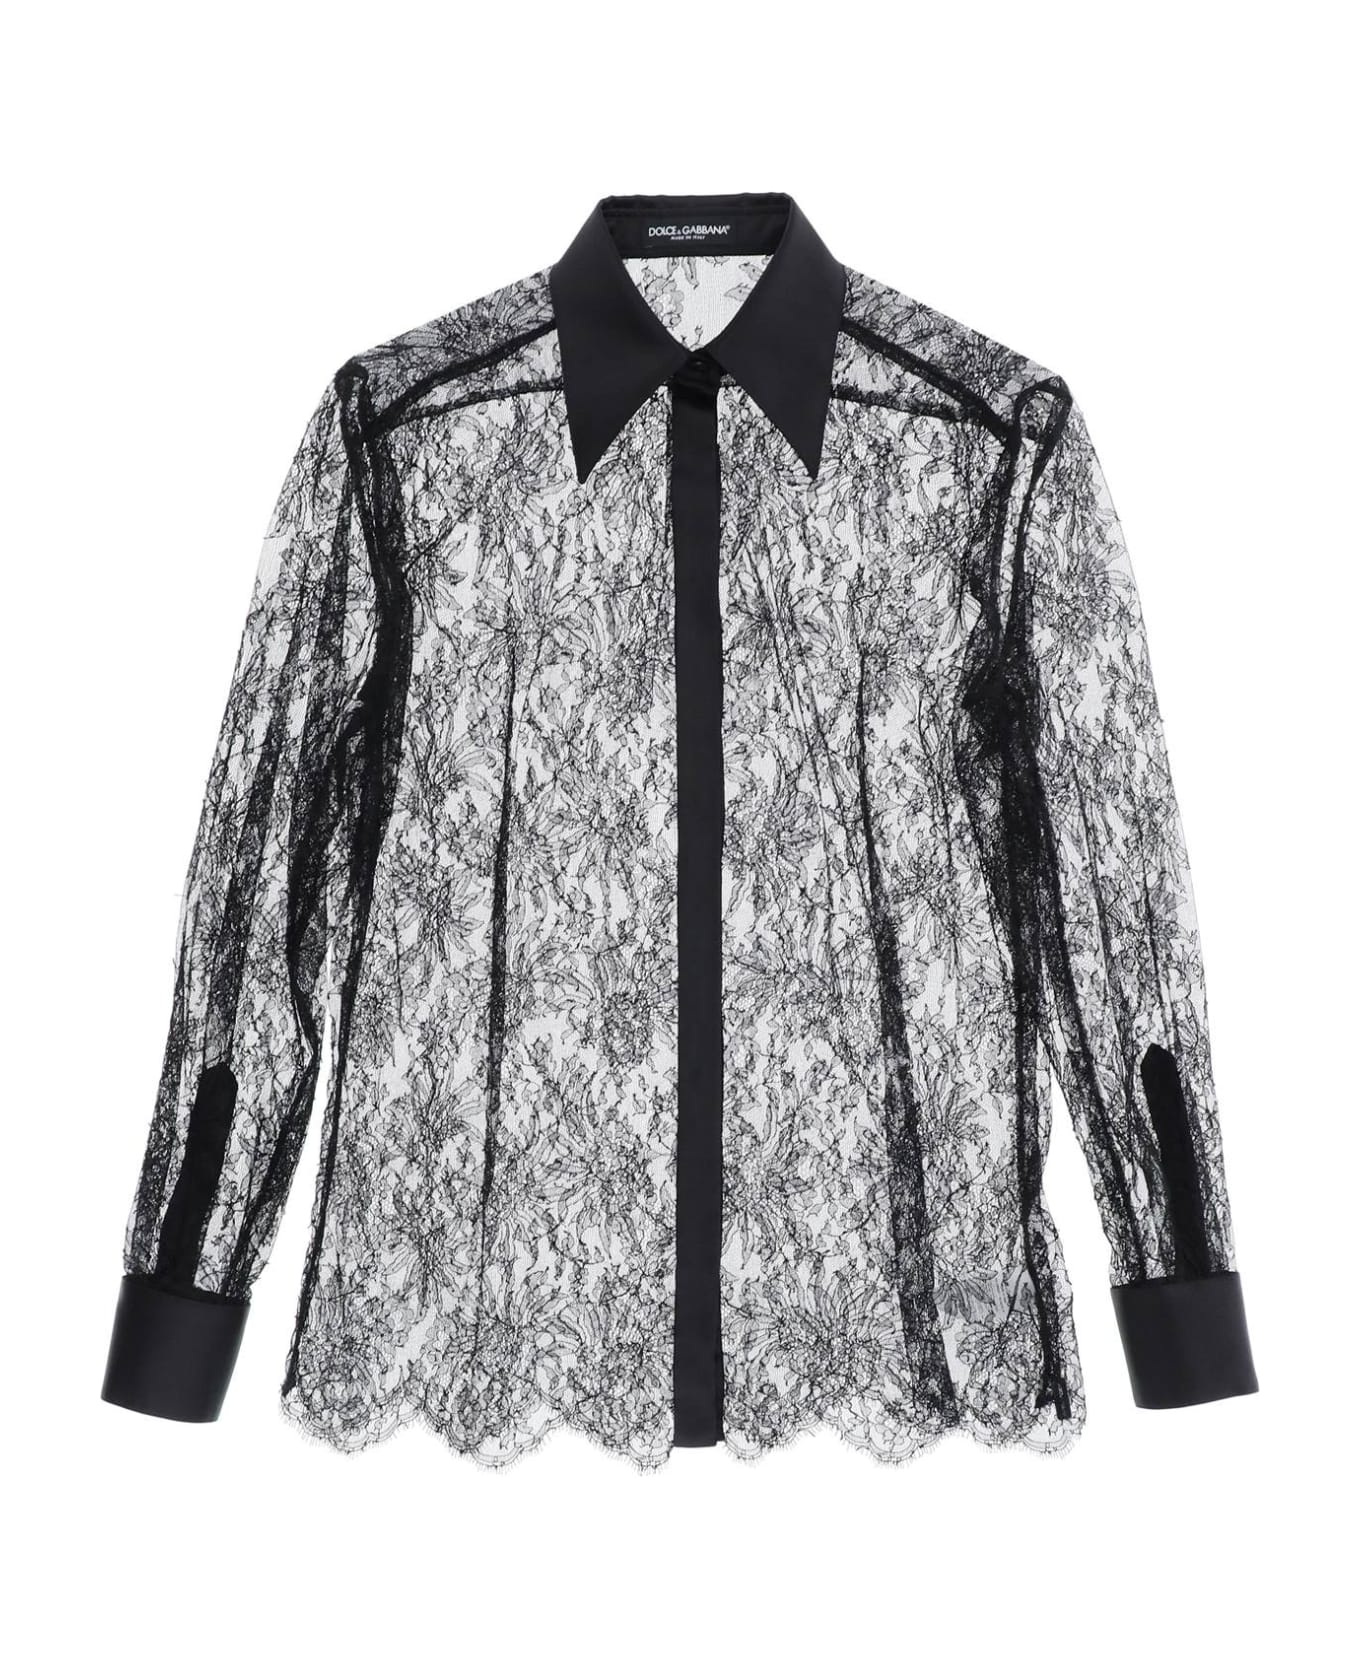 Dolce & Gabbana Chantilly Lace Shirt With Satin Details - NERO (Black) シャツ